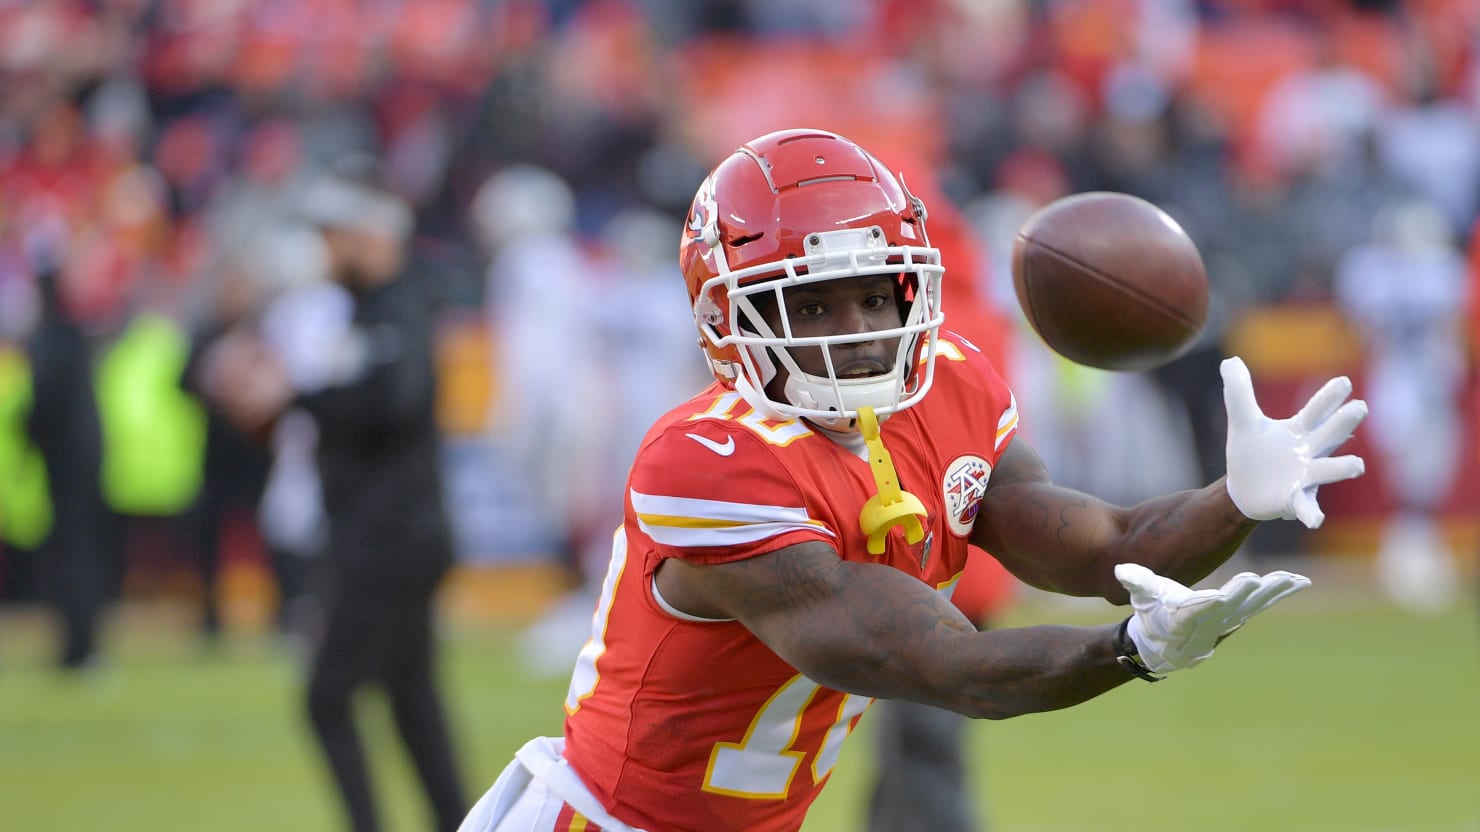 Kansas City Chiefs Welcome Back Tyreek Hill After Child-Abuse Allegations.